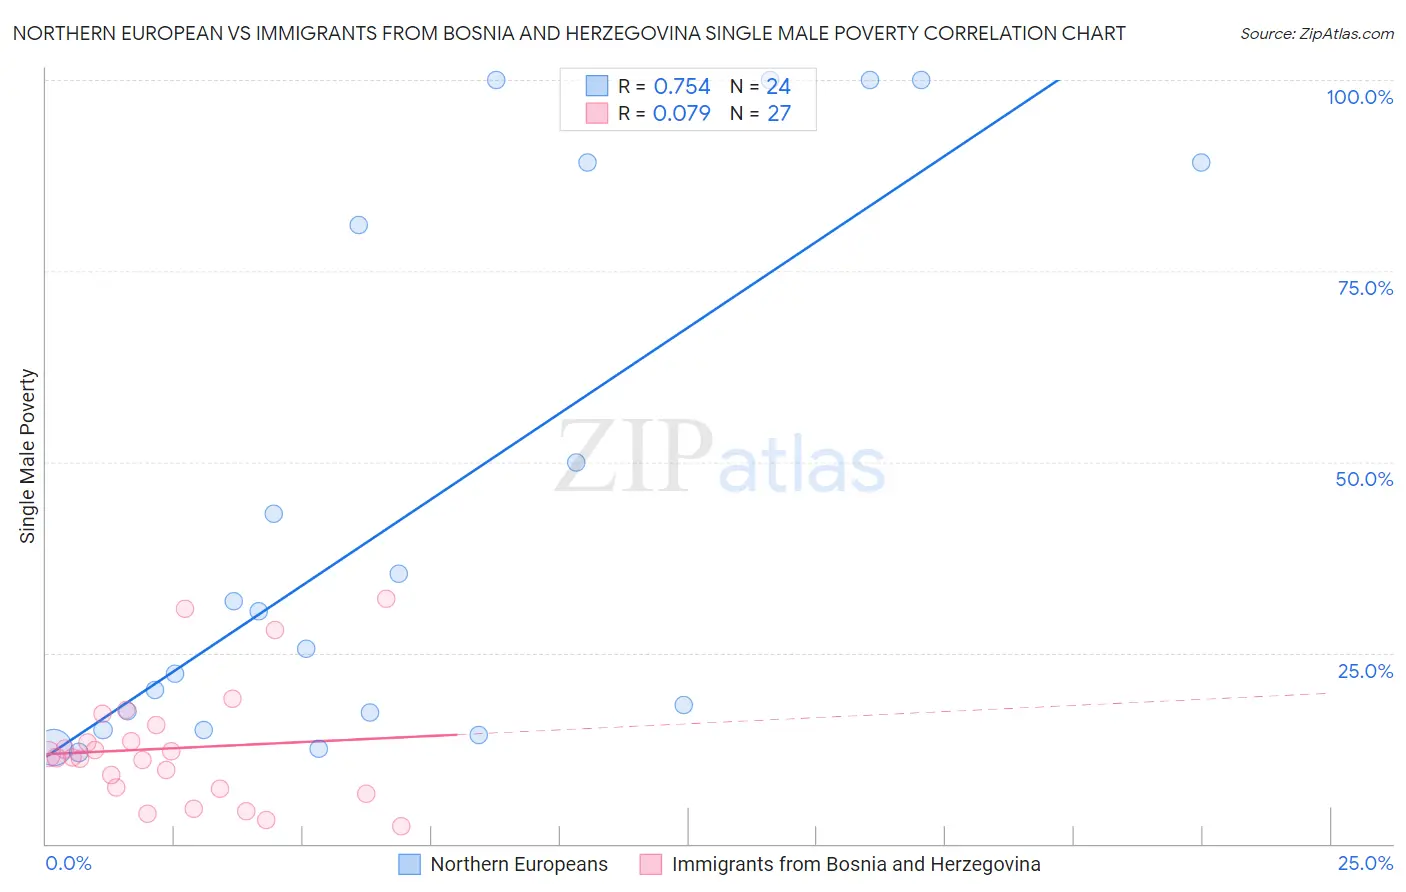 Northern European vs Immigrants from Bosnia and Herzegovina Single Male Poverty